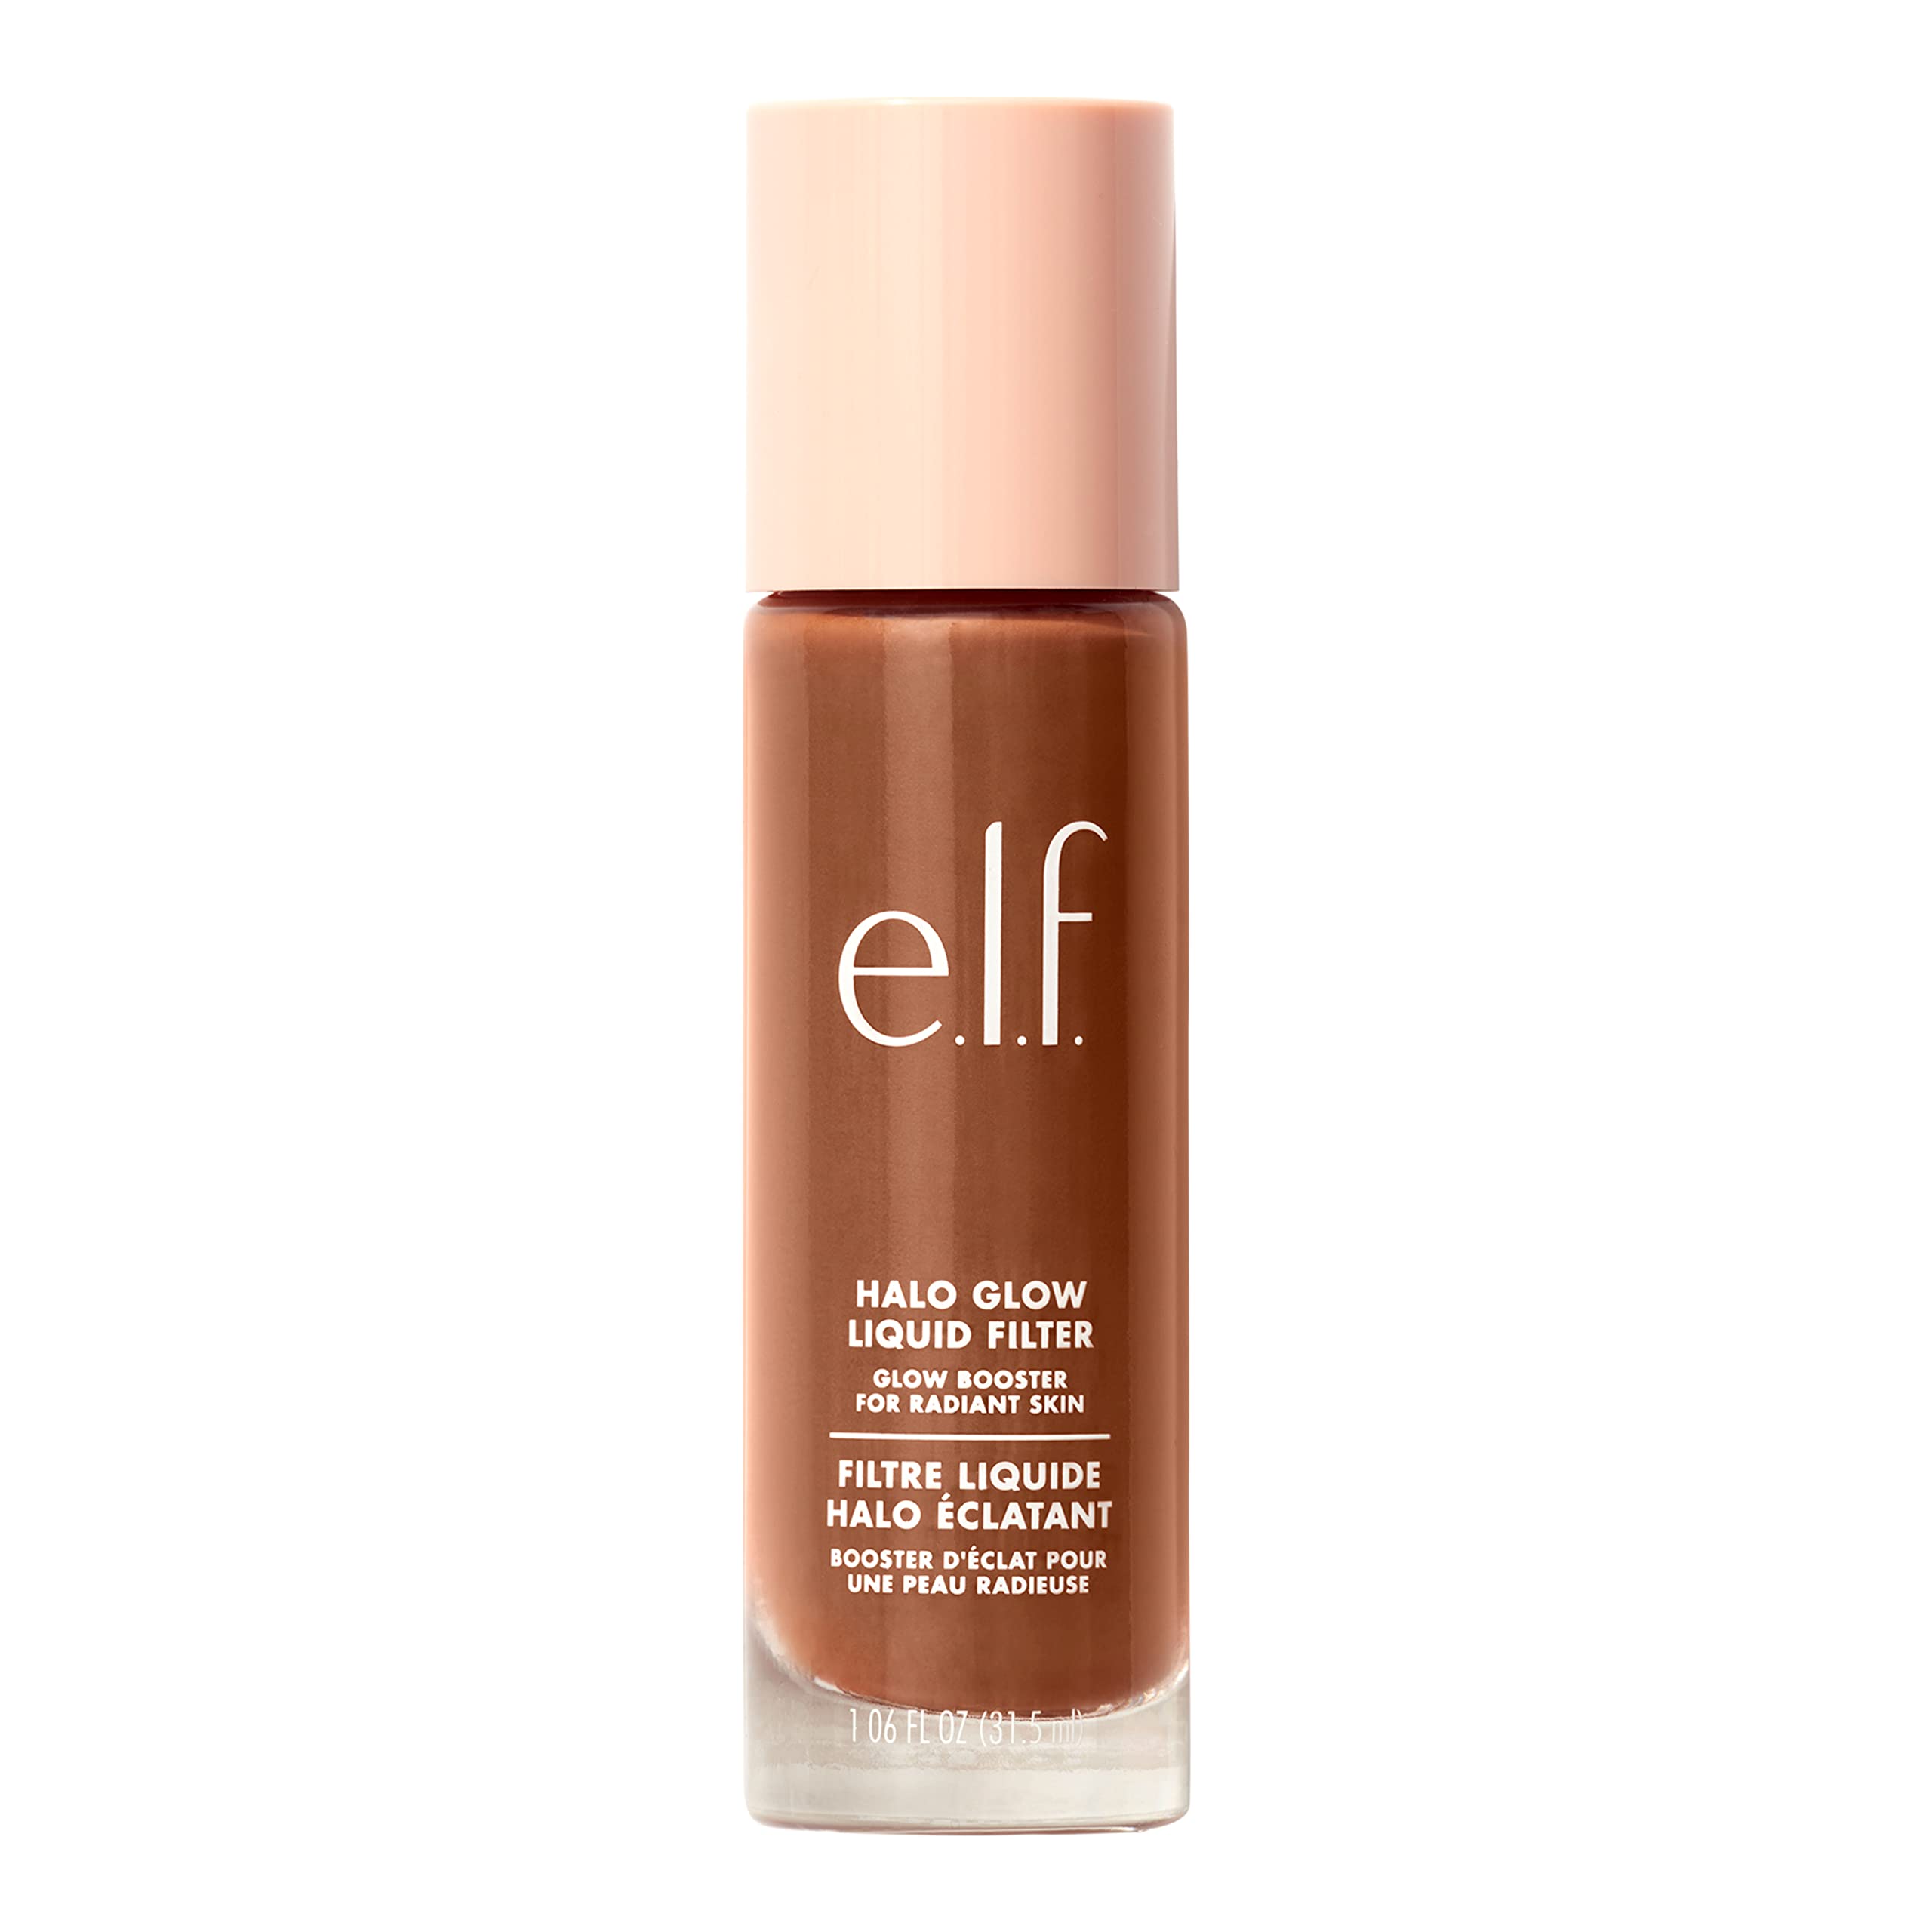 e.l.f. Halo Glow Liquid Filter, Complexion Booster For A Glowing, Soft-Focus Look, Infused With Hyaluronic Acid, Vegan & Cruelty-Free, 7 Deep/Rich